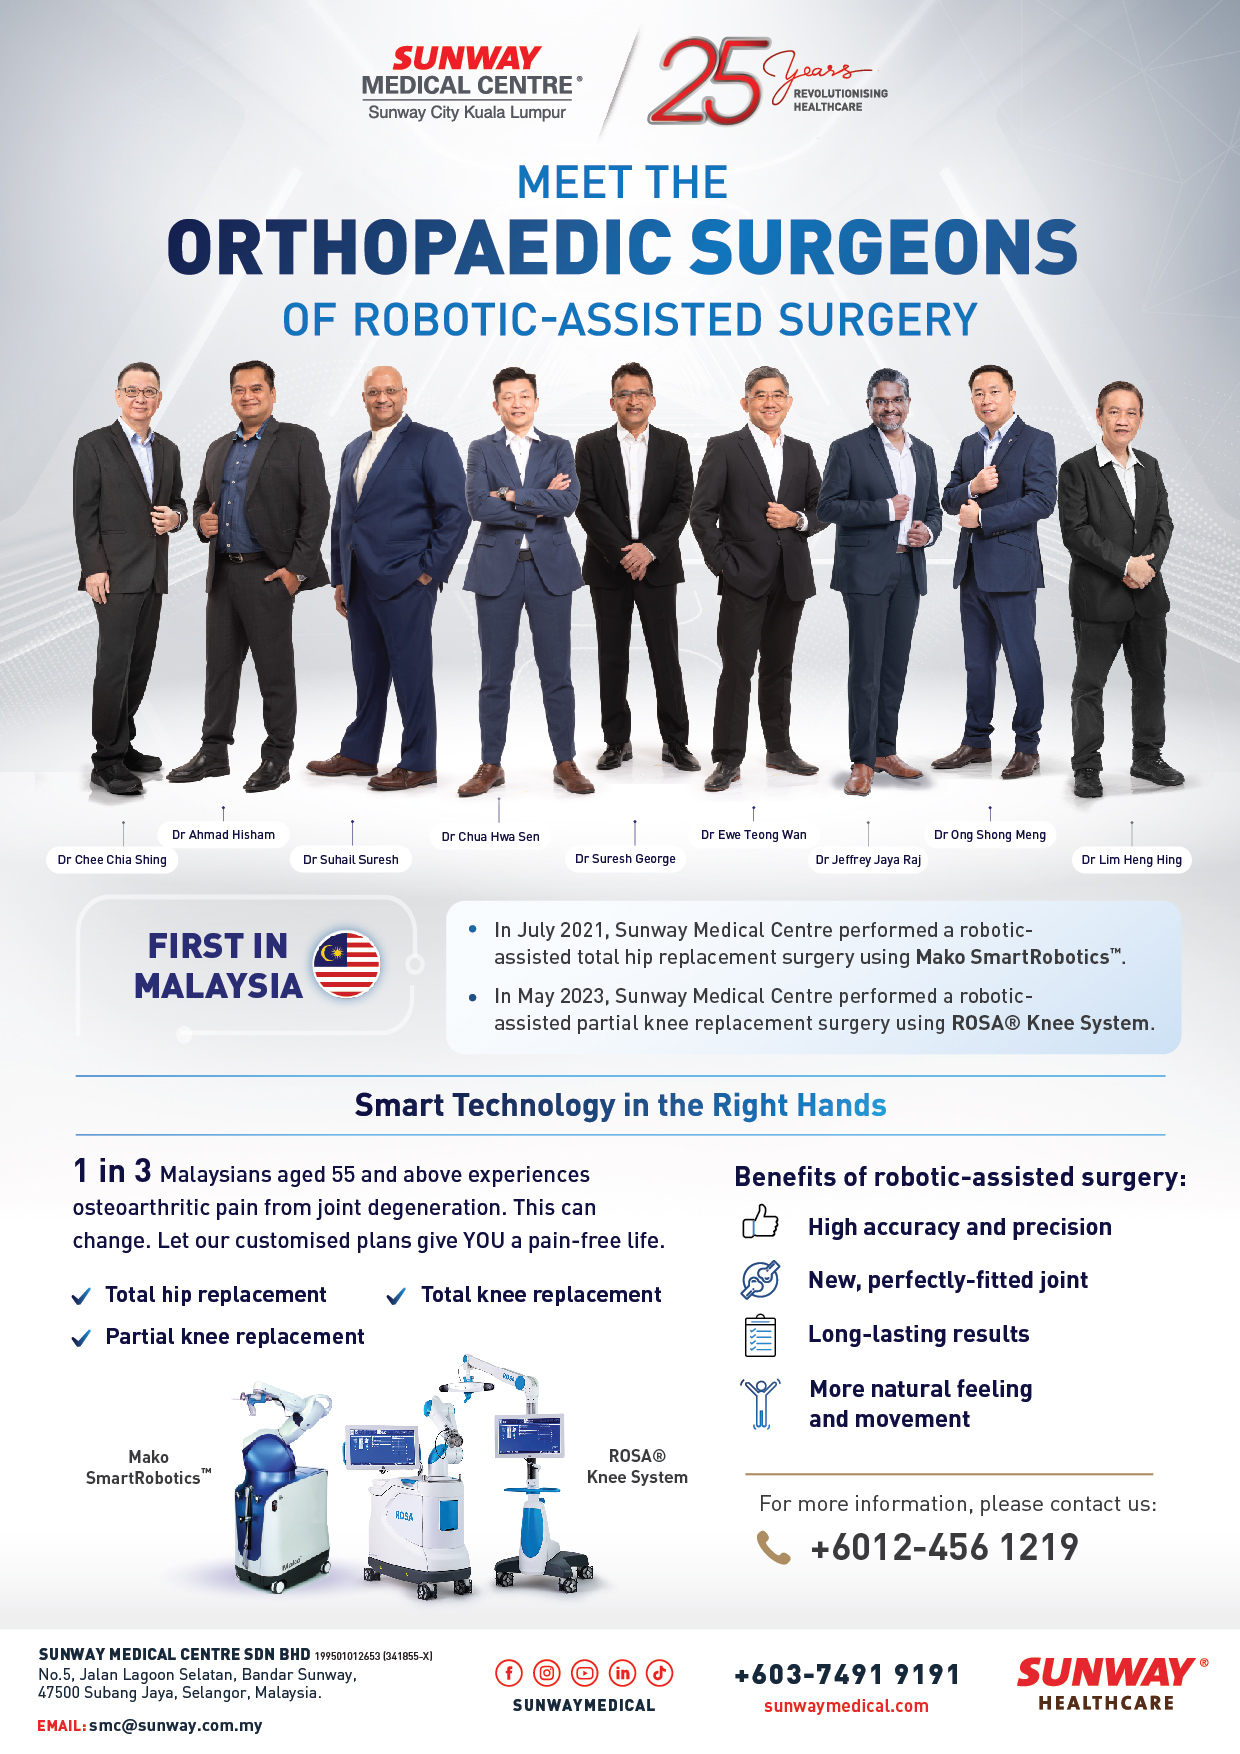 Robotic Arm-Assisted Joint Replacement Surgery